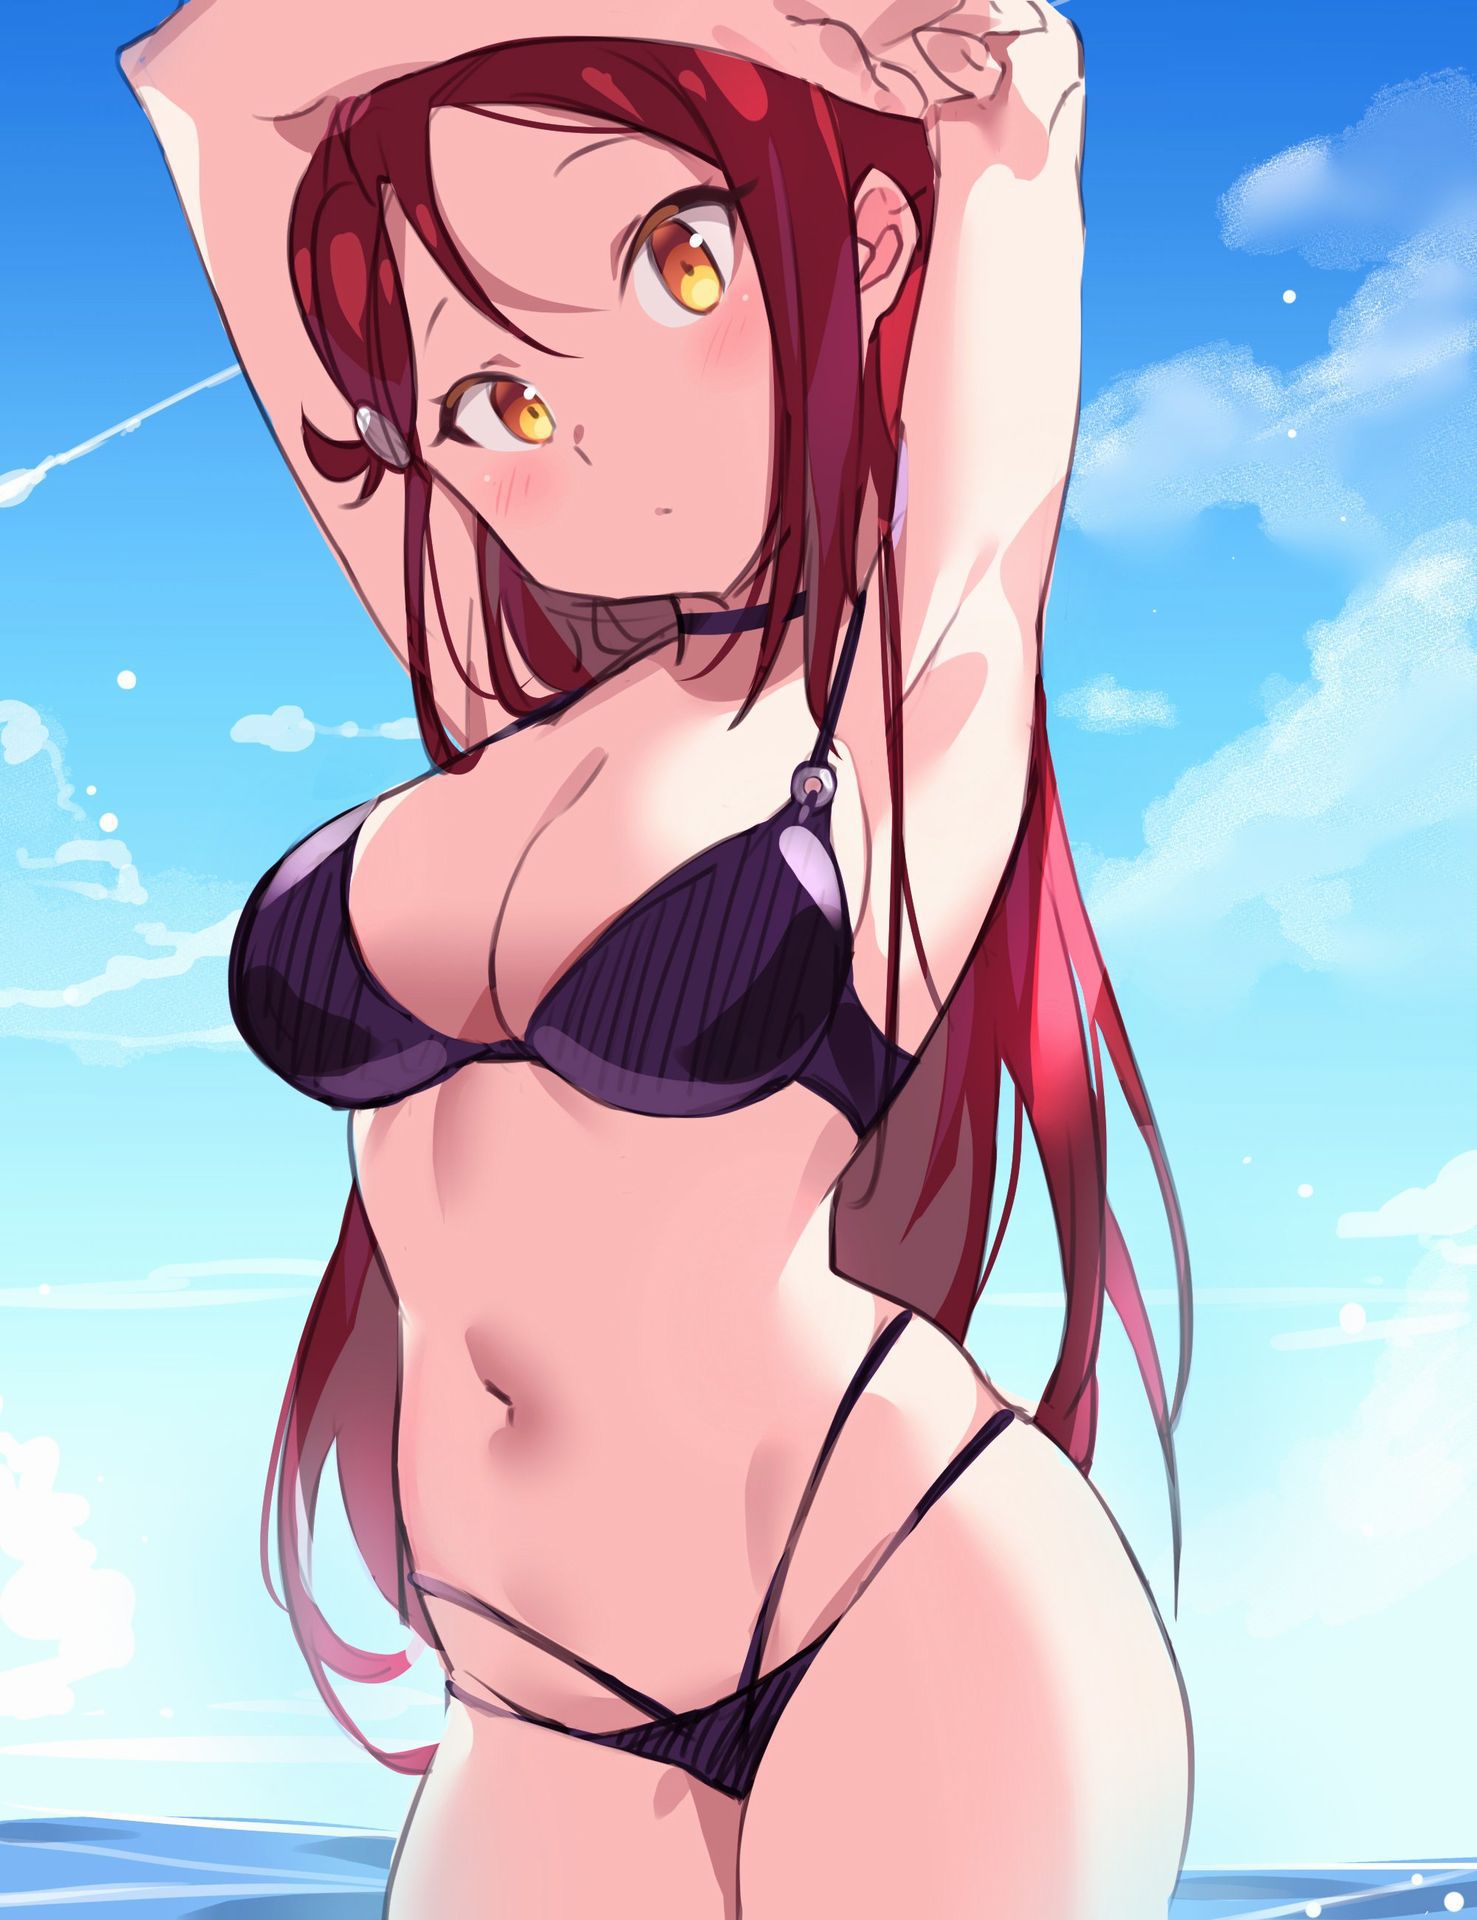 [2nd] secondary image of a cool girl wearing a swimsuit part 4 [non-erotic swimsuit] 5